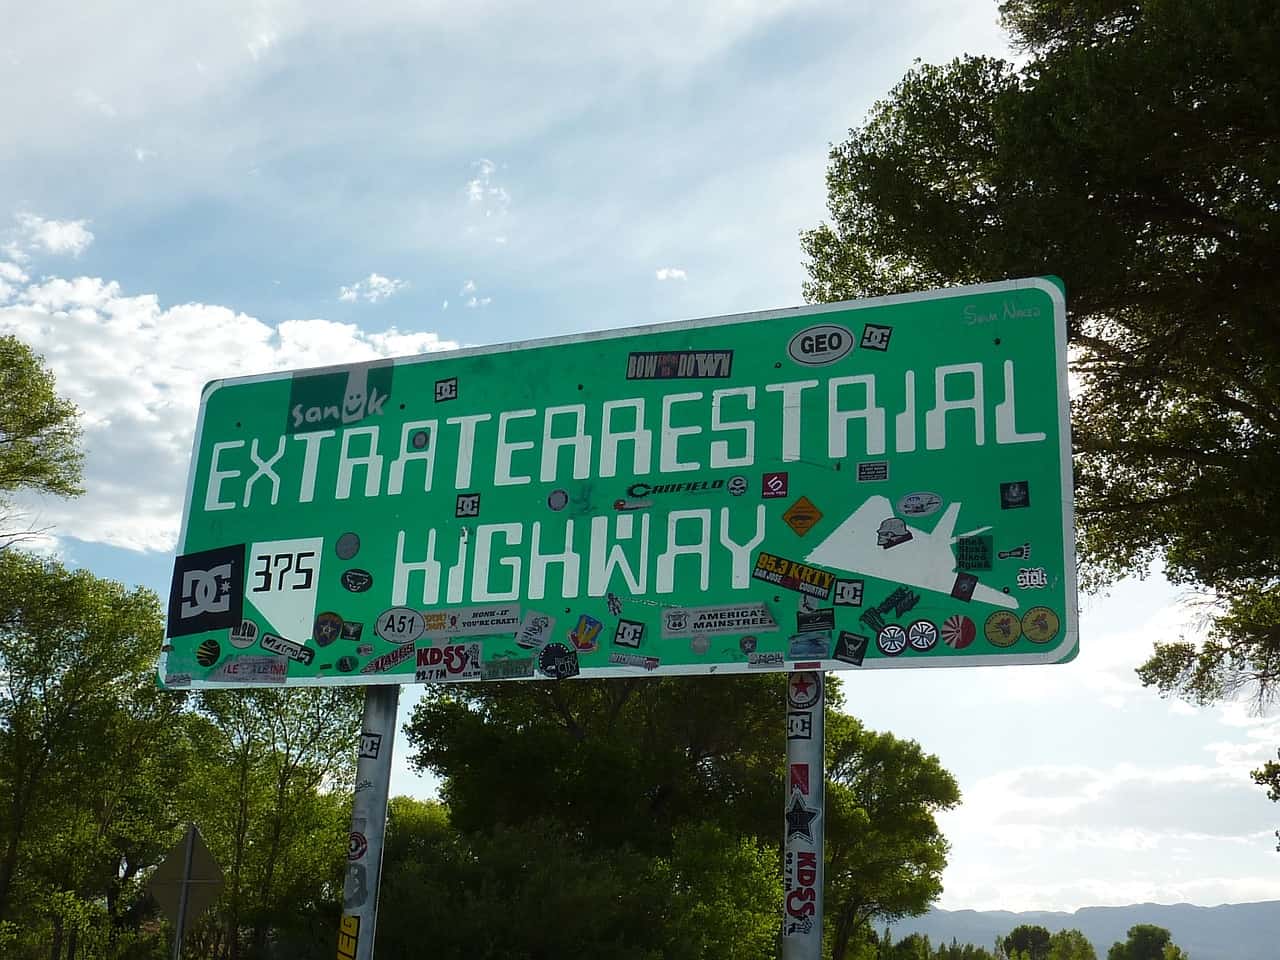 The Extraterrestrial Highway is just one site you might visit. Image source: Pixabay user Martin Str.